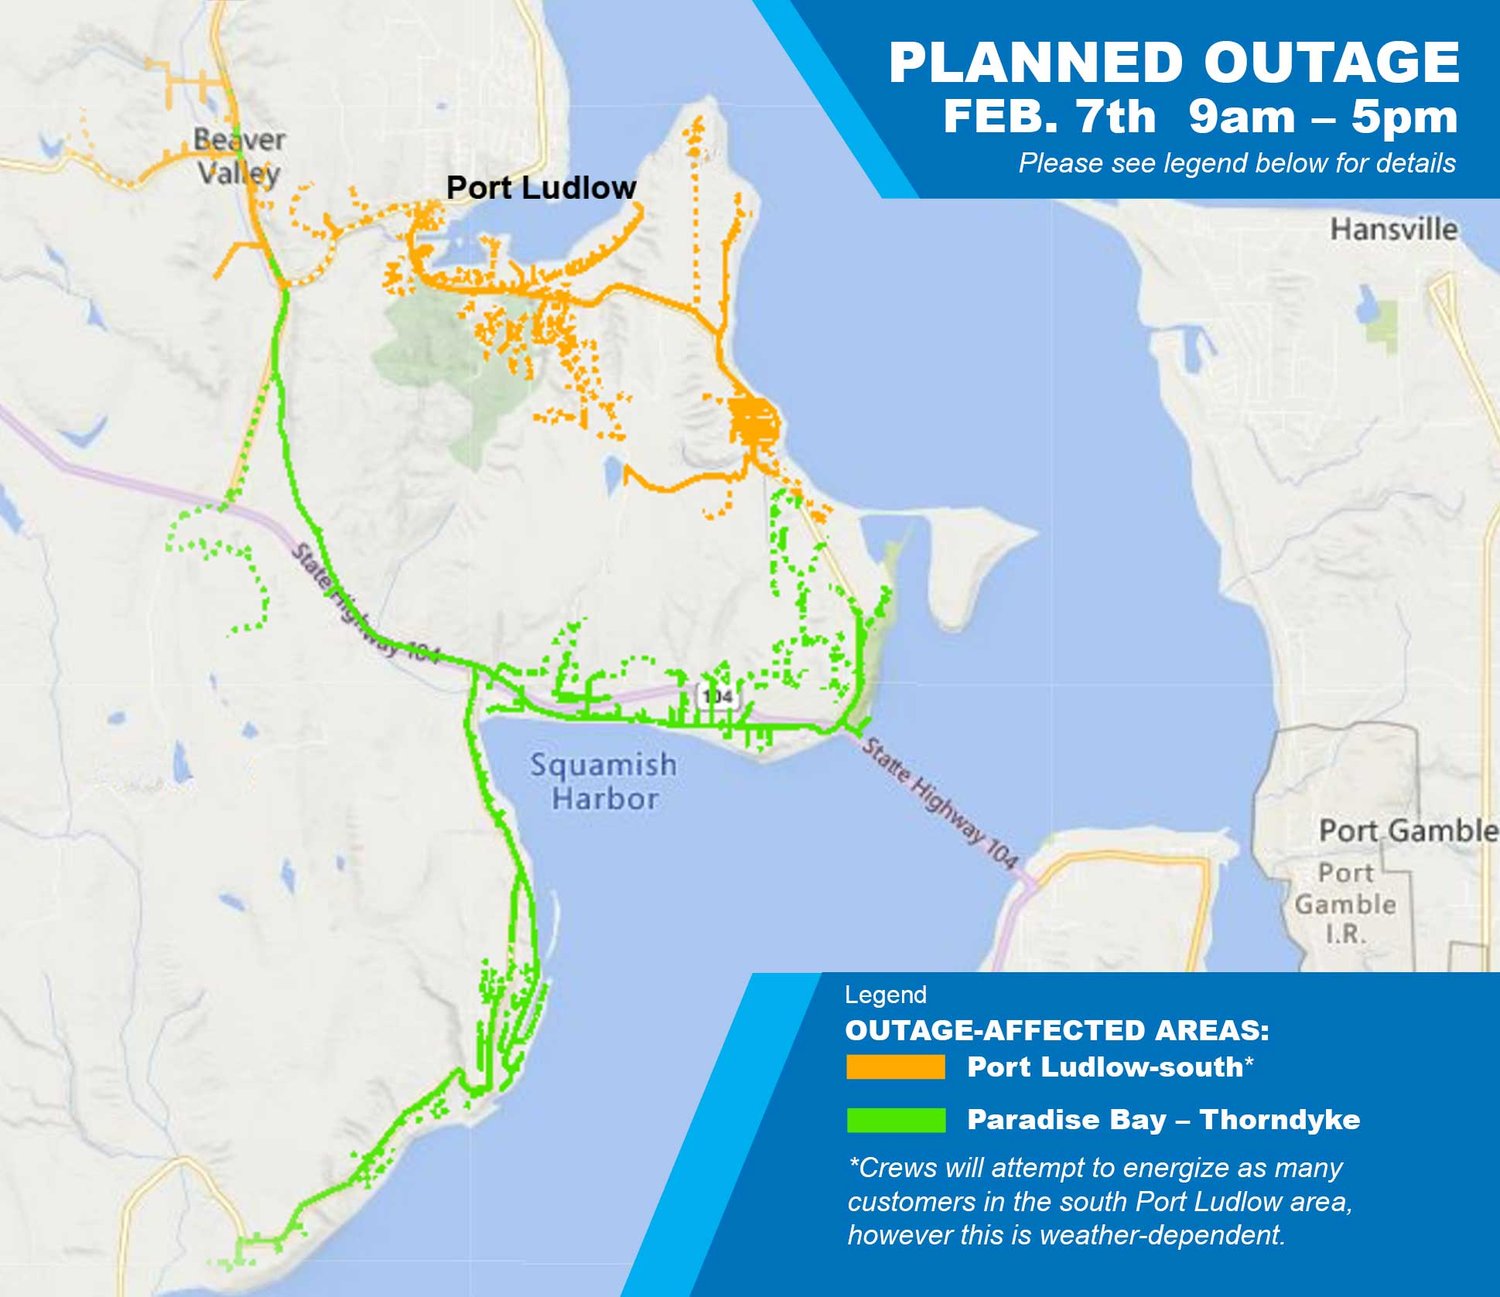 The outage area in Port Ludlow and Paradise Bay.